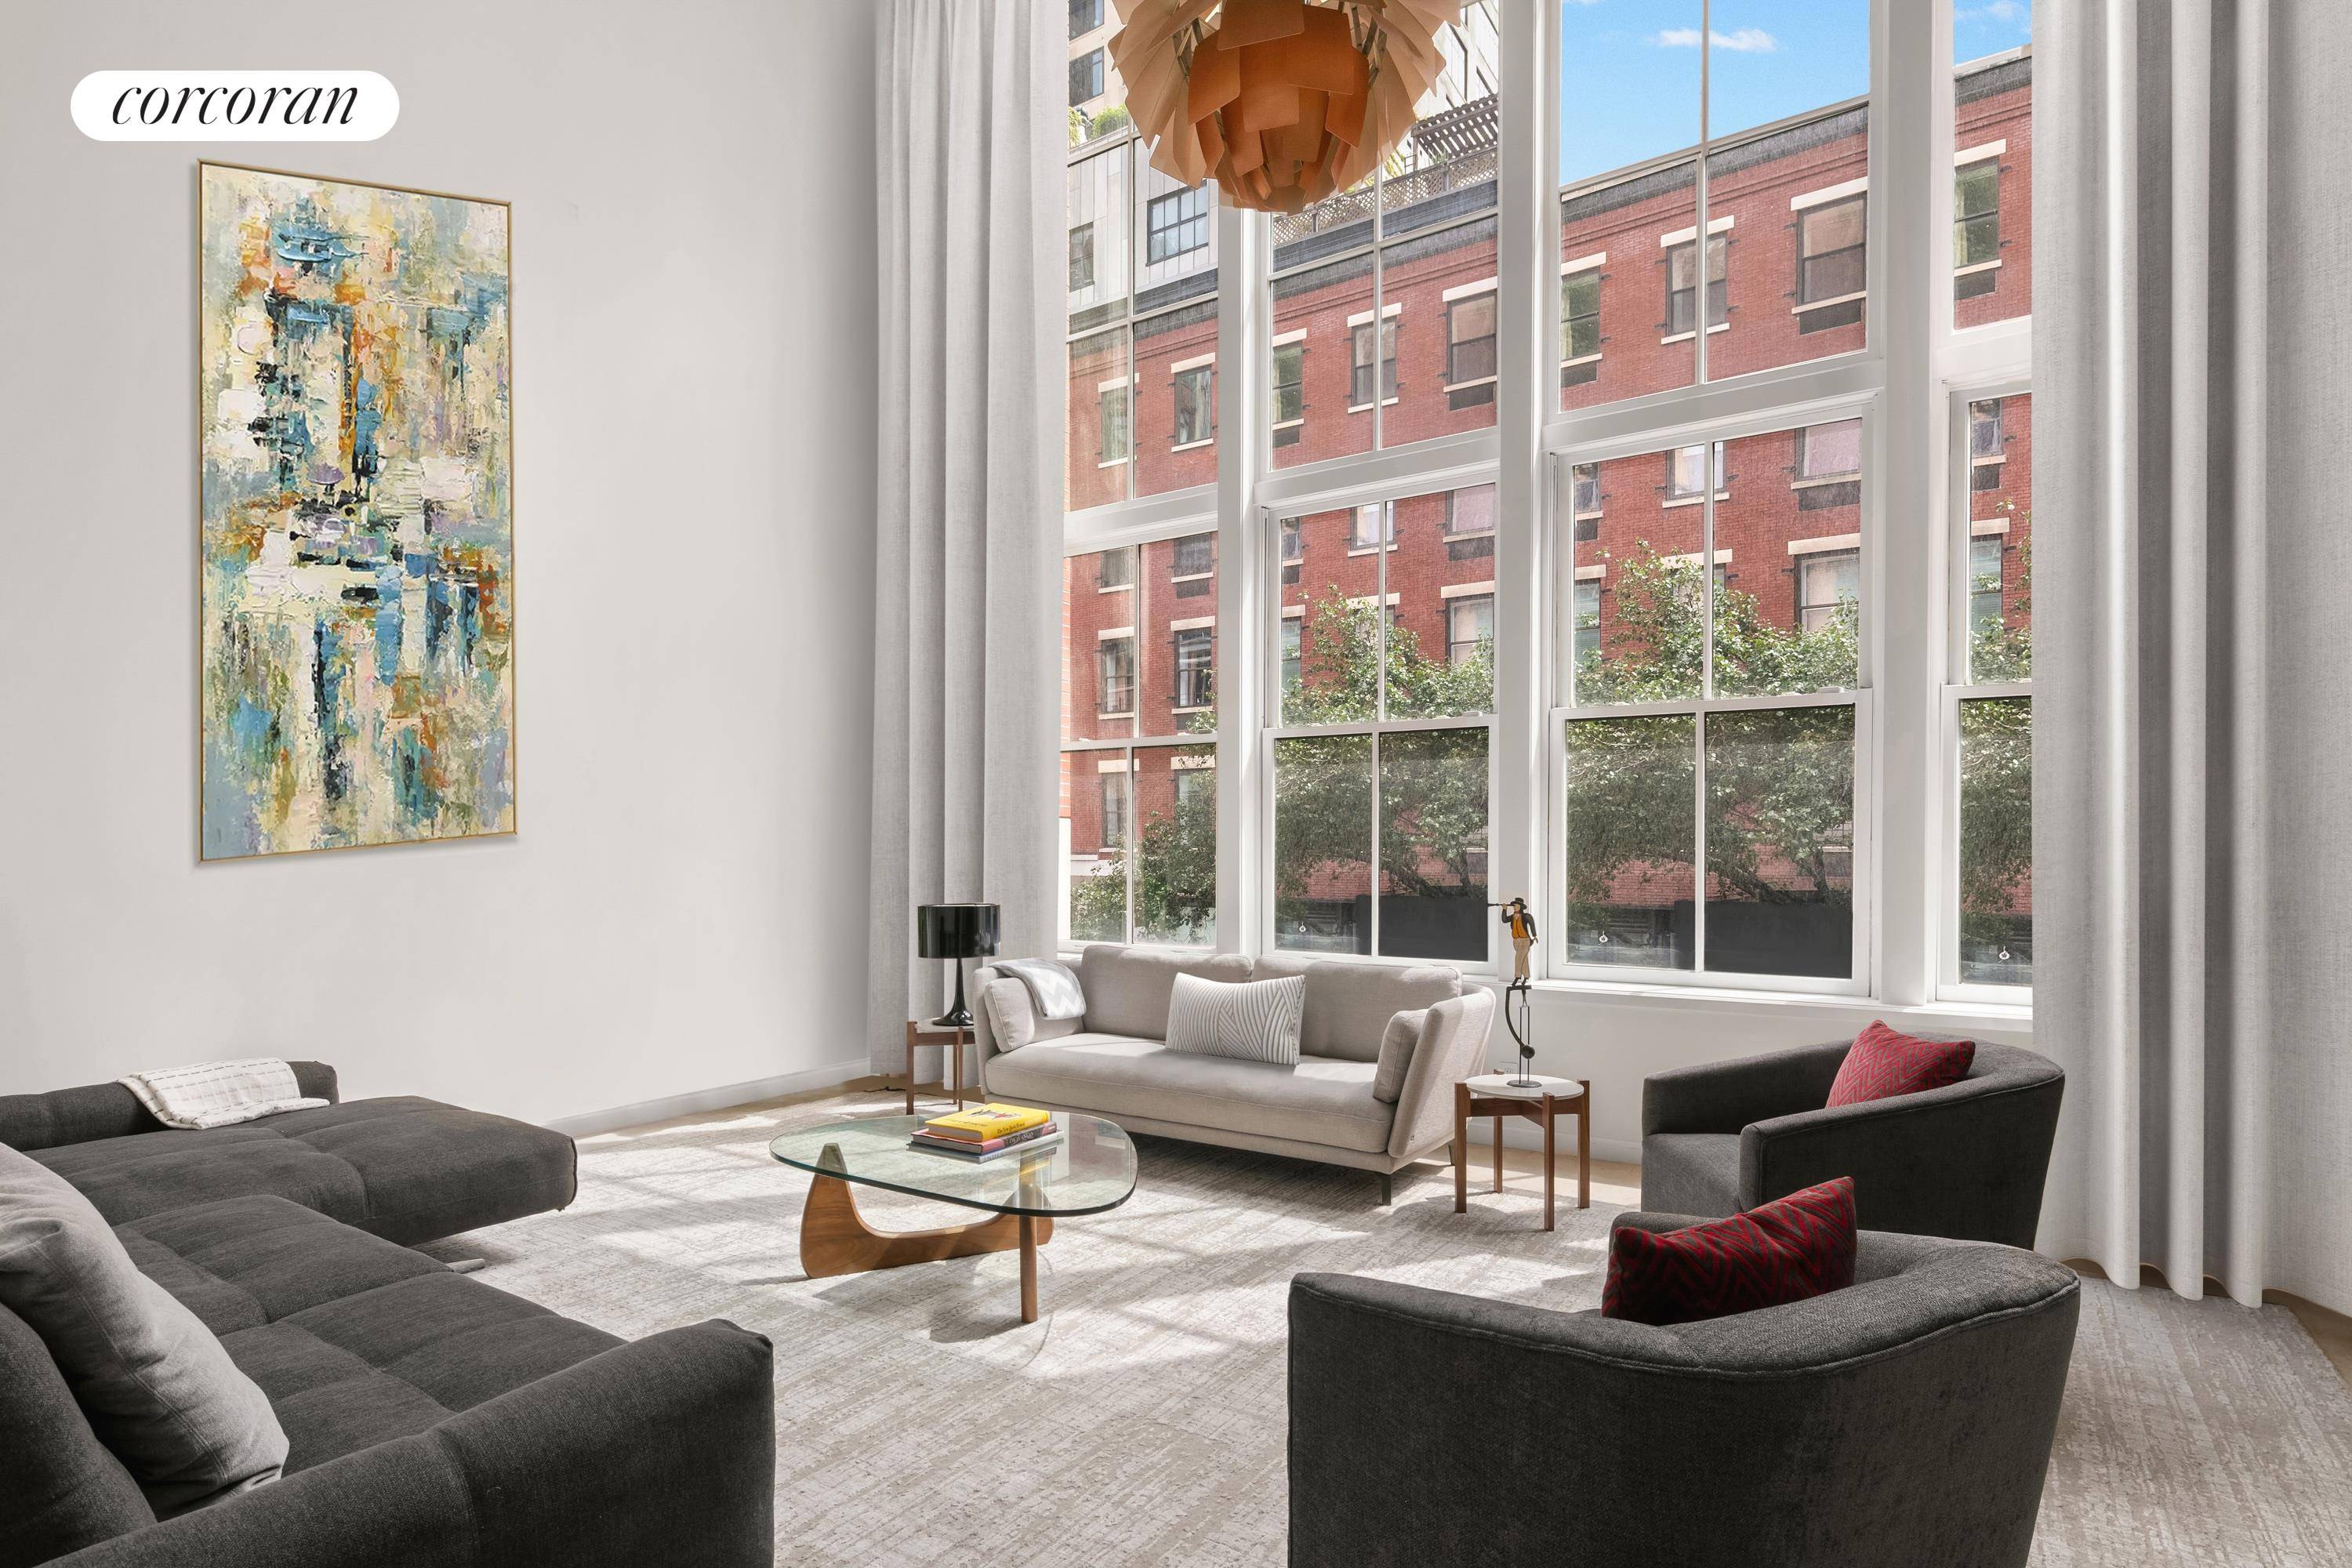 An exceptional opportunity awaits in this one of a kind Tribeca Townhouse !